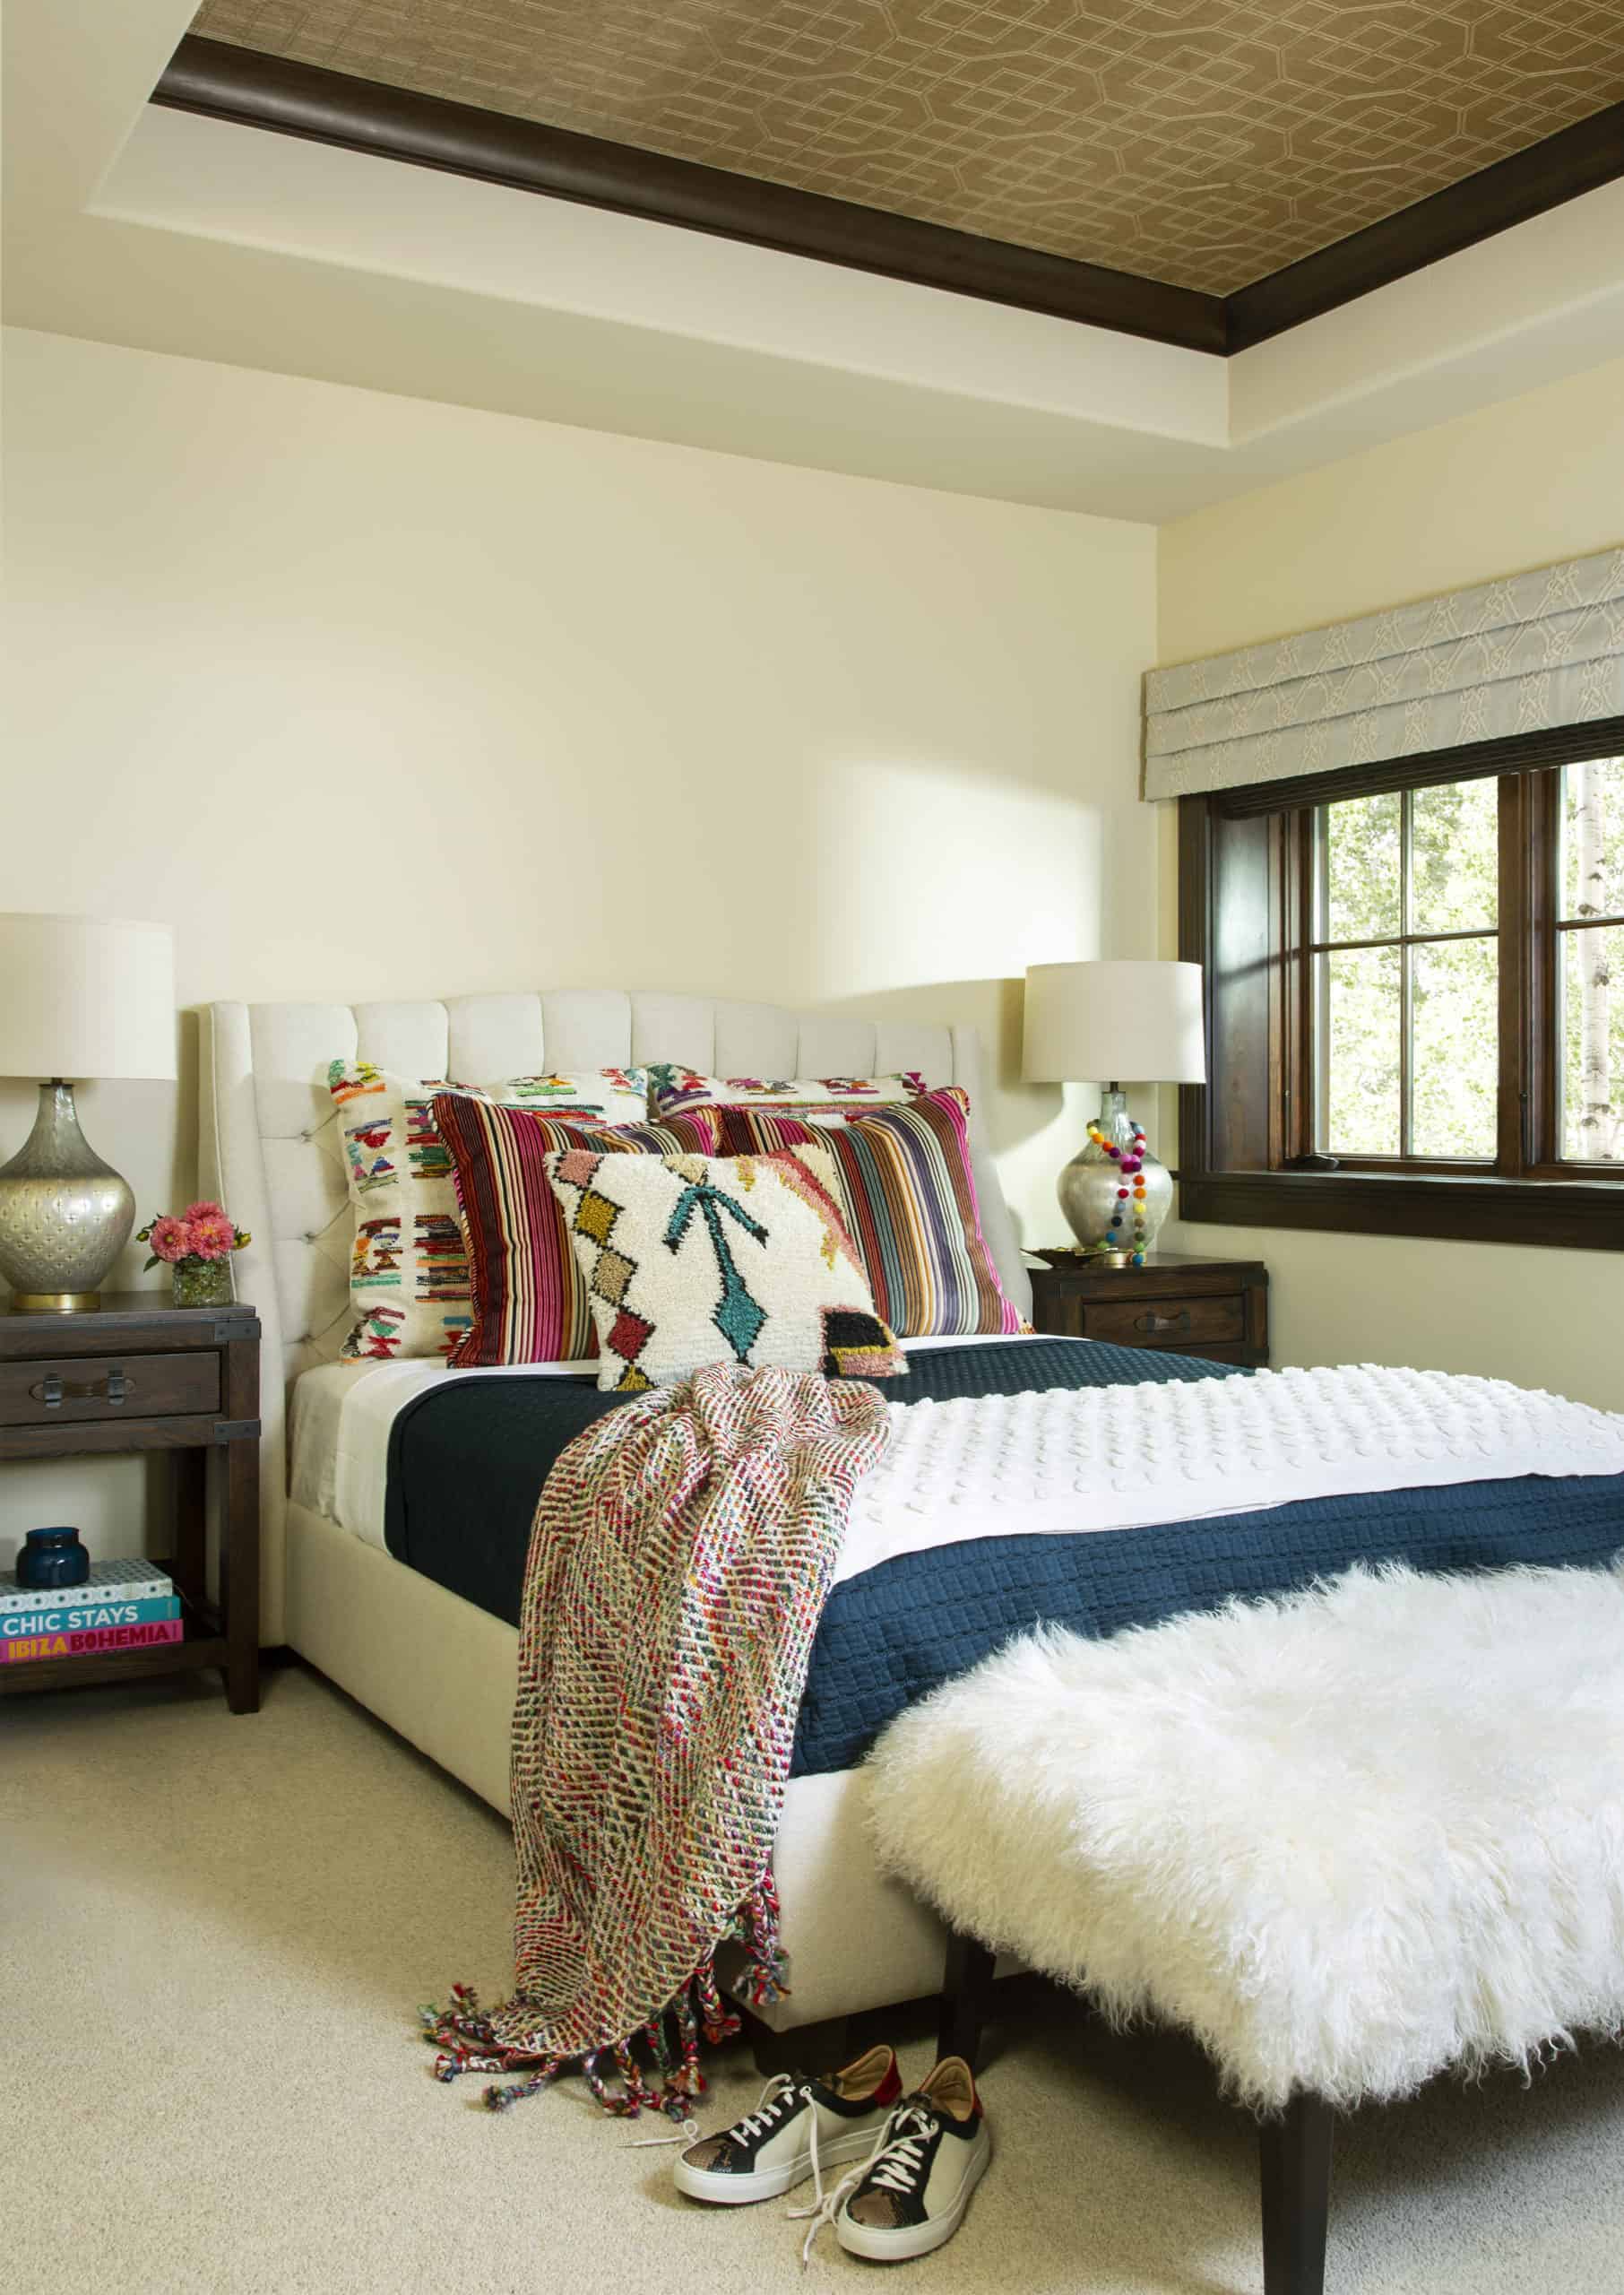 Perfect guest bedroom furnishings and decor